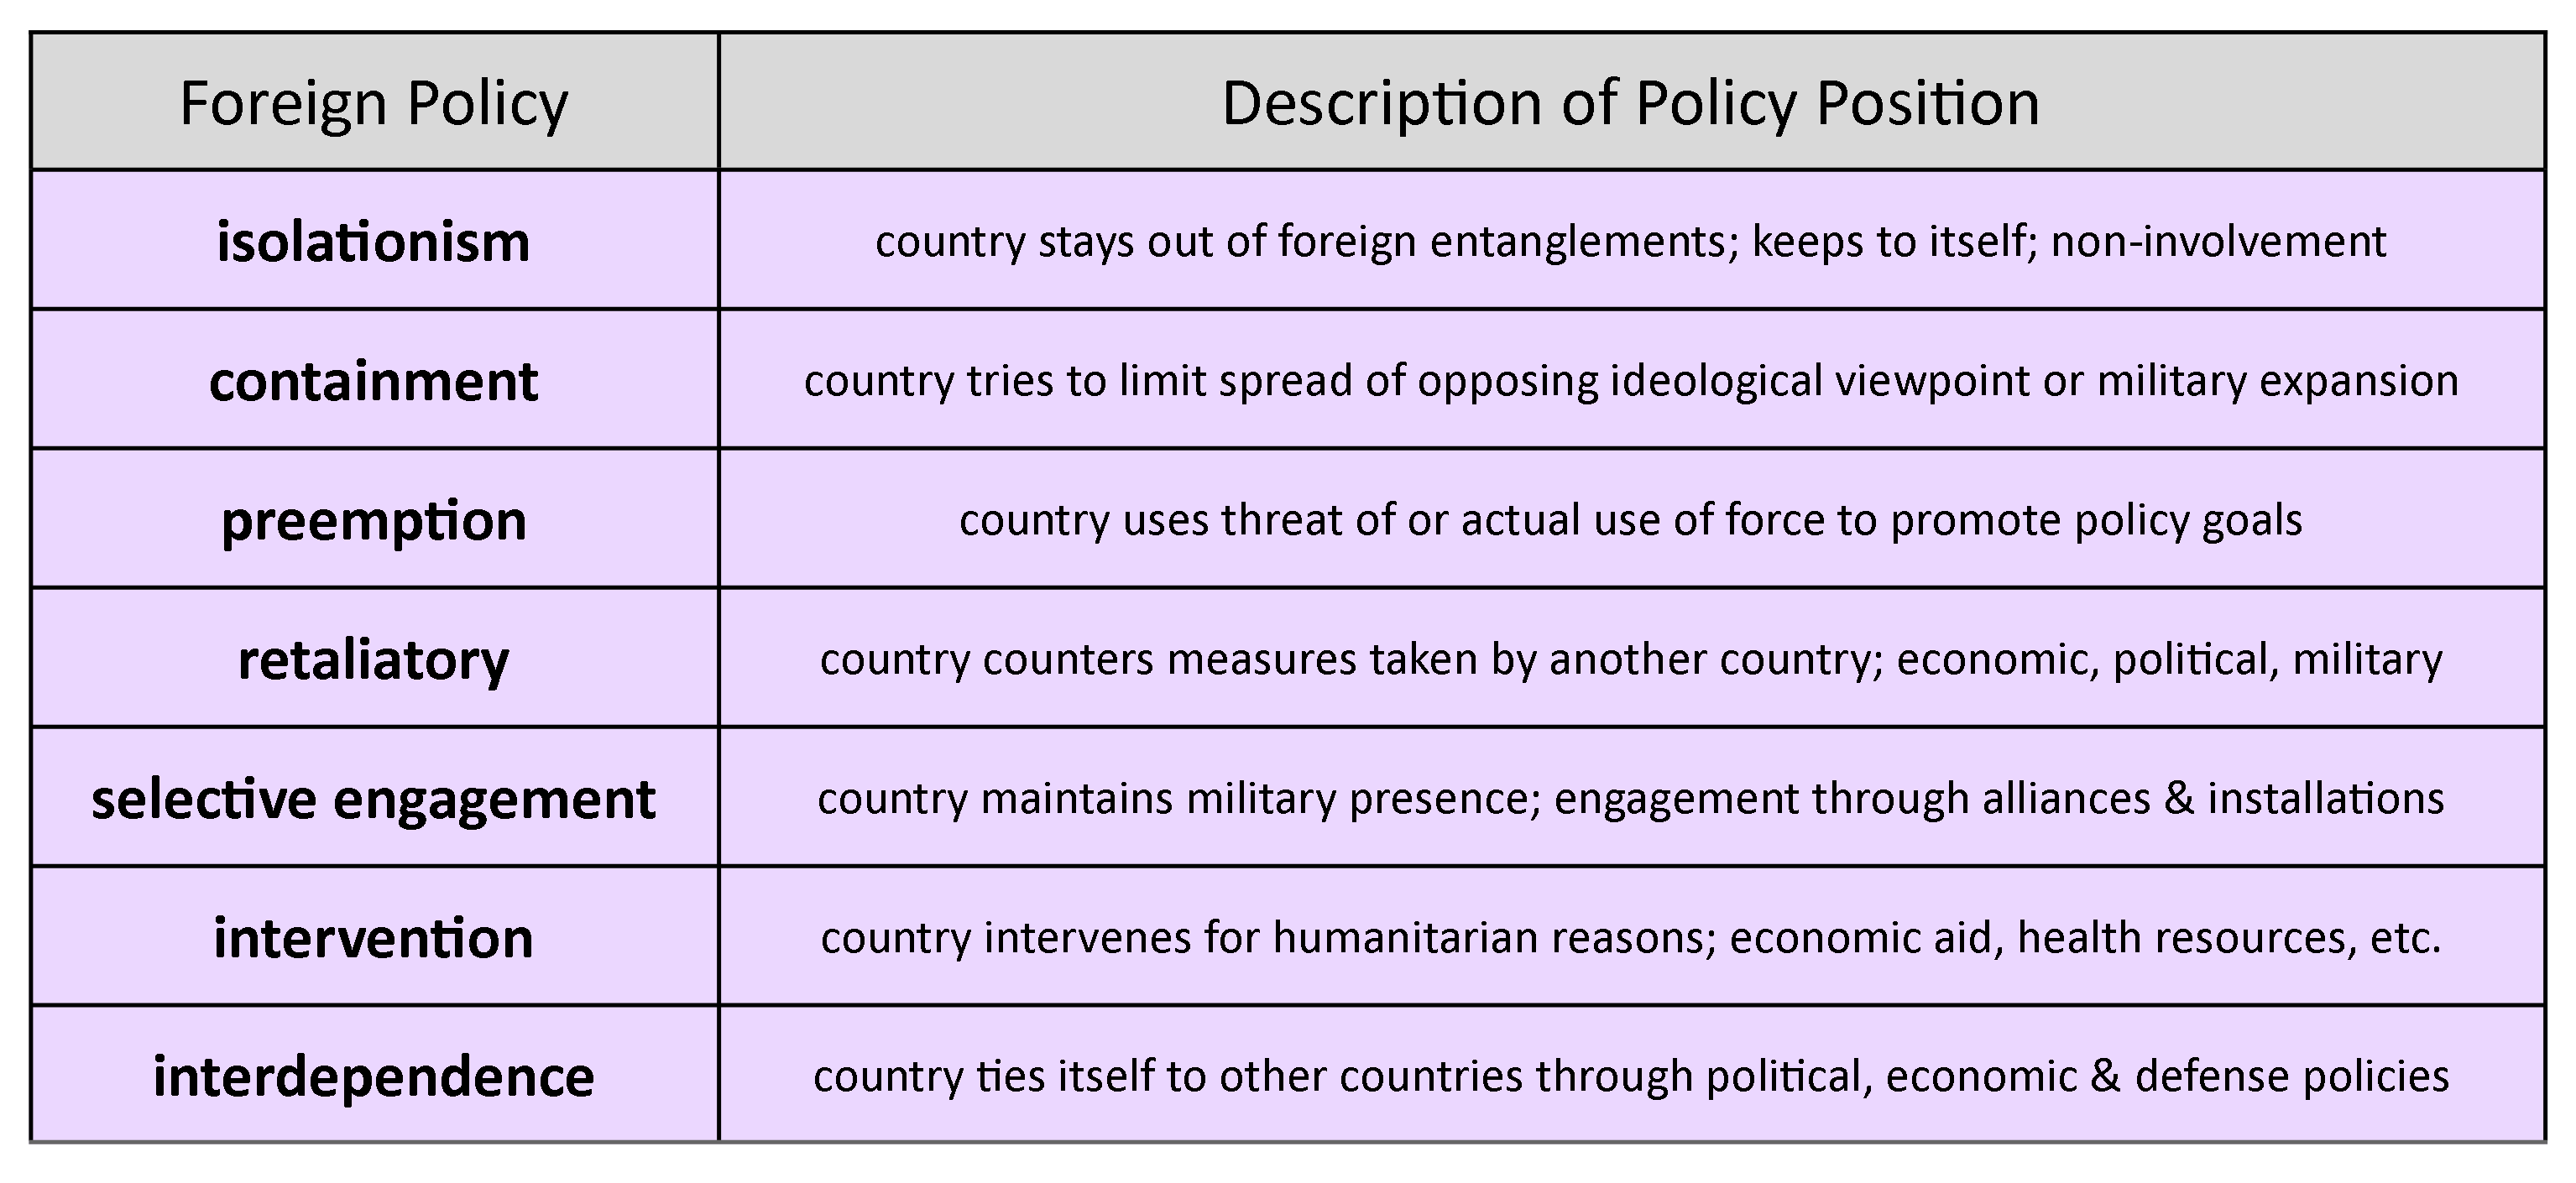 V. foreign policy of selected countries